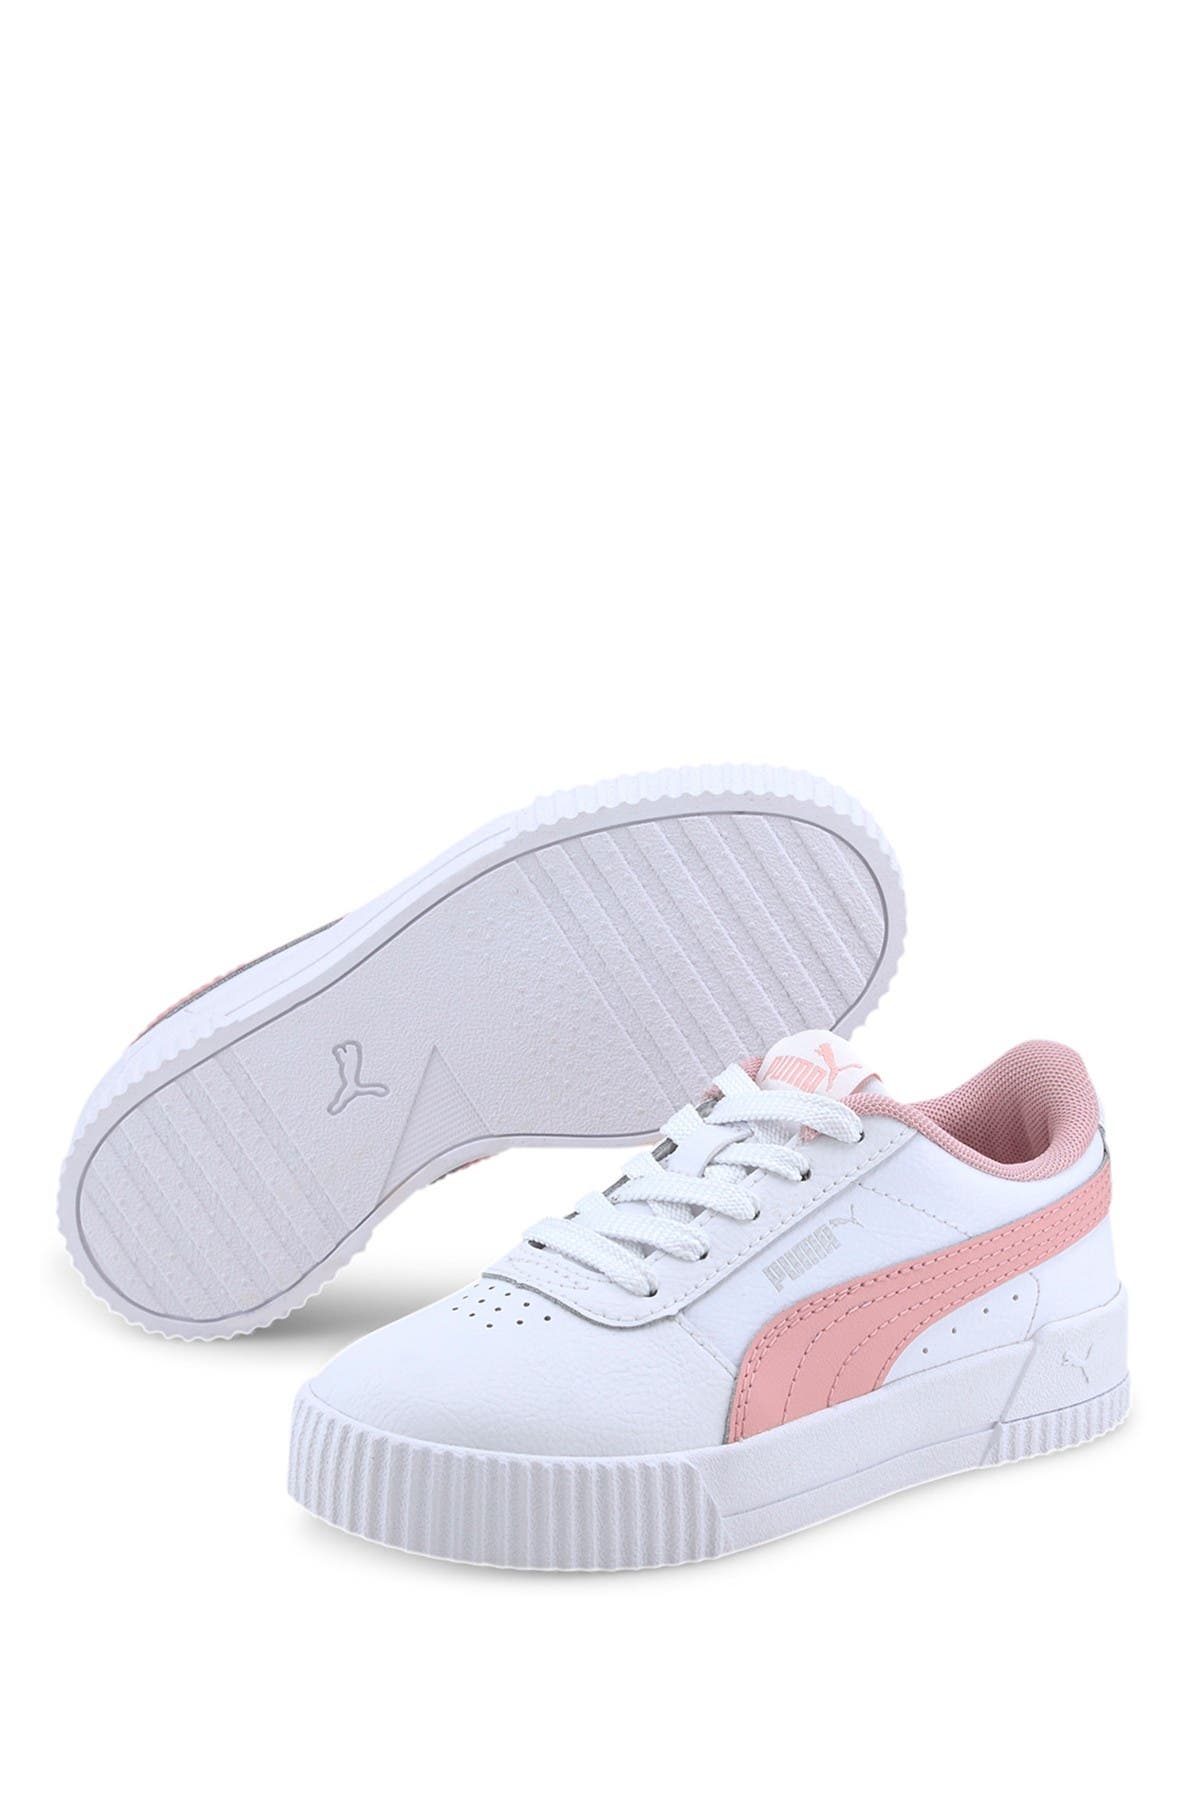 shoes puma for girl